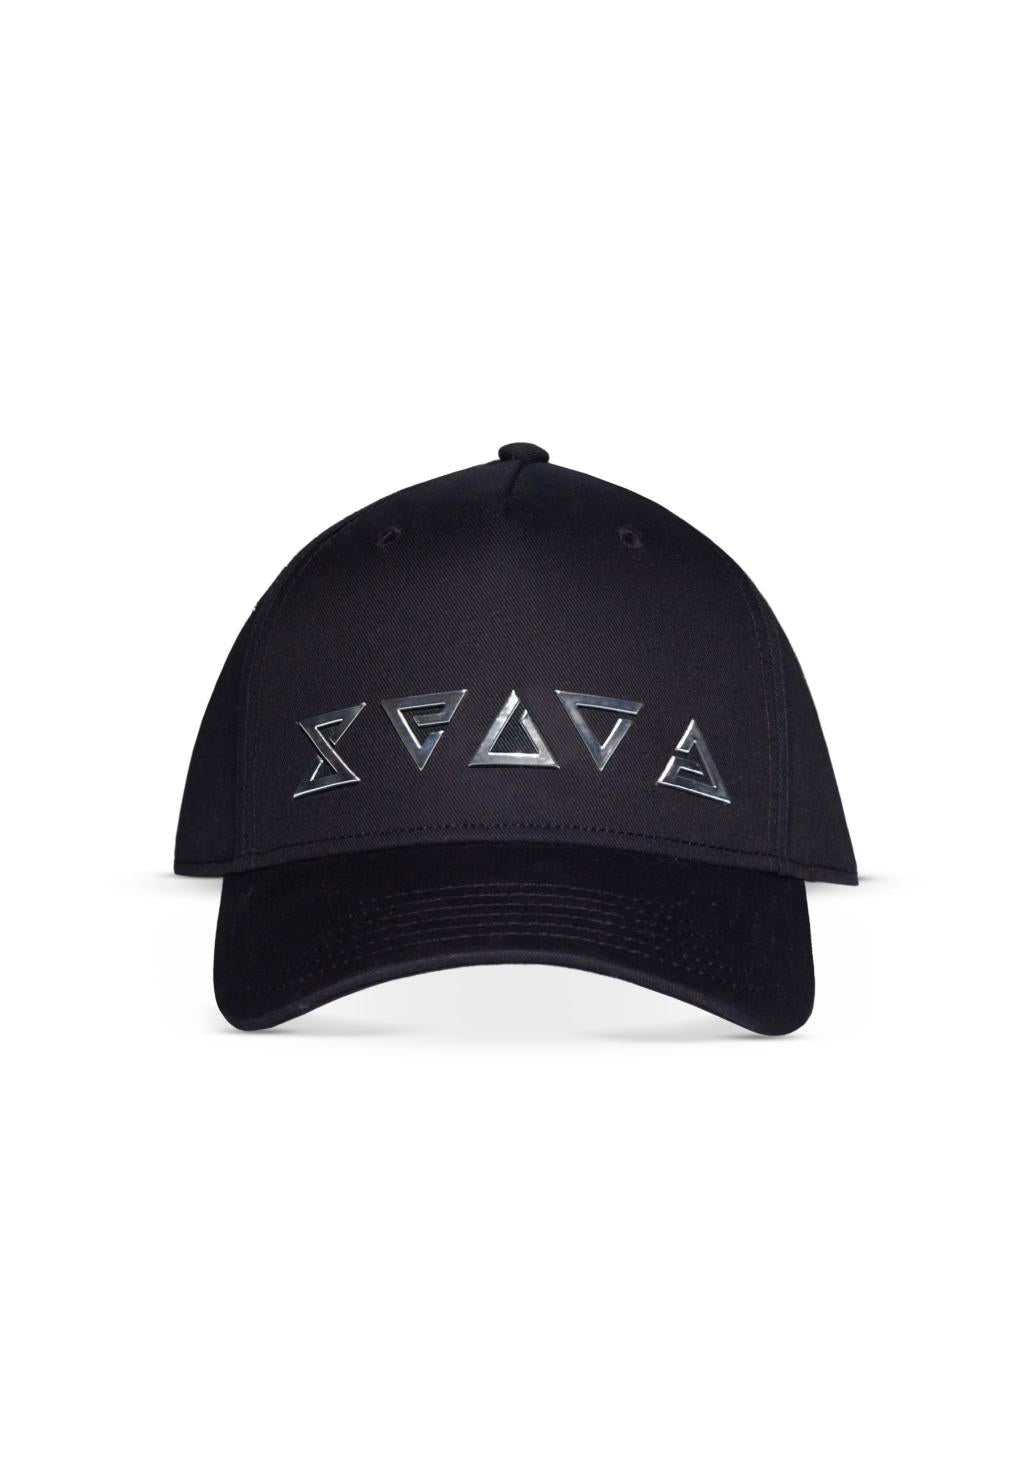 THE WITCHER - Signs - Adjustable Cap